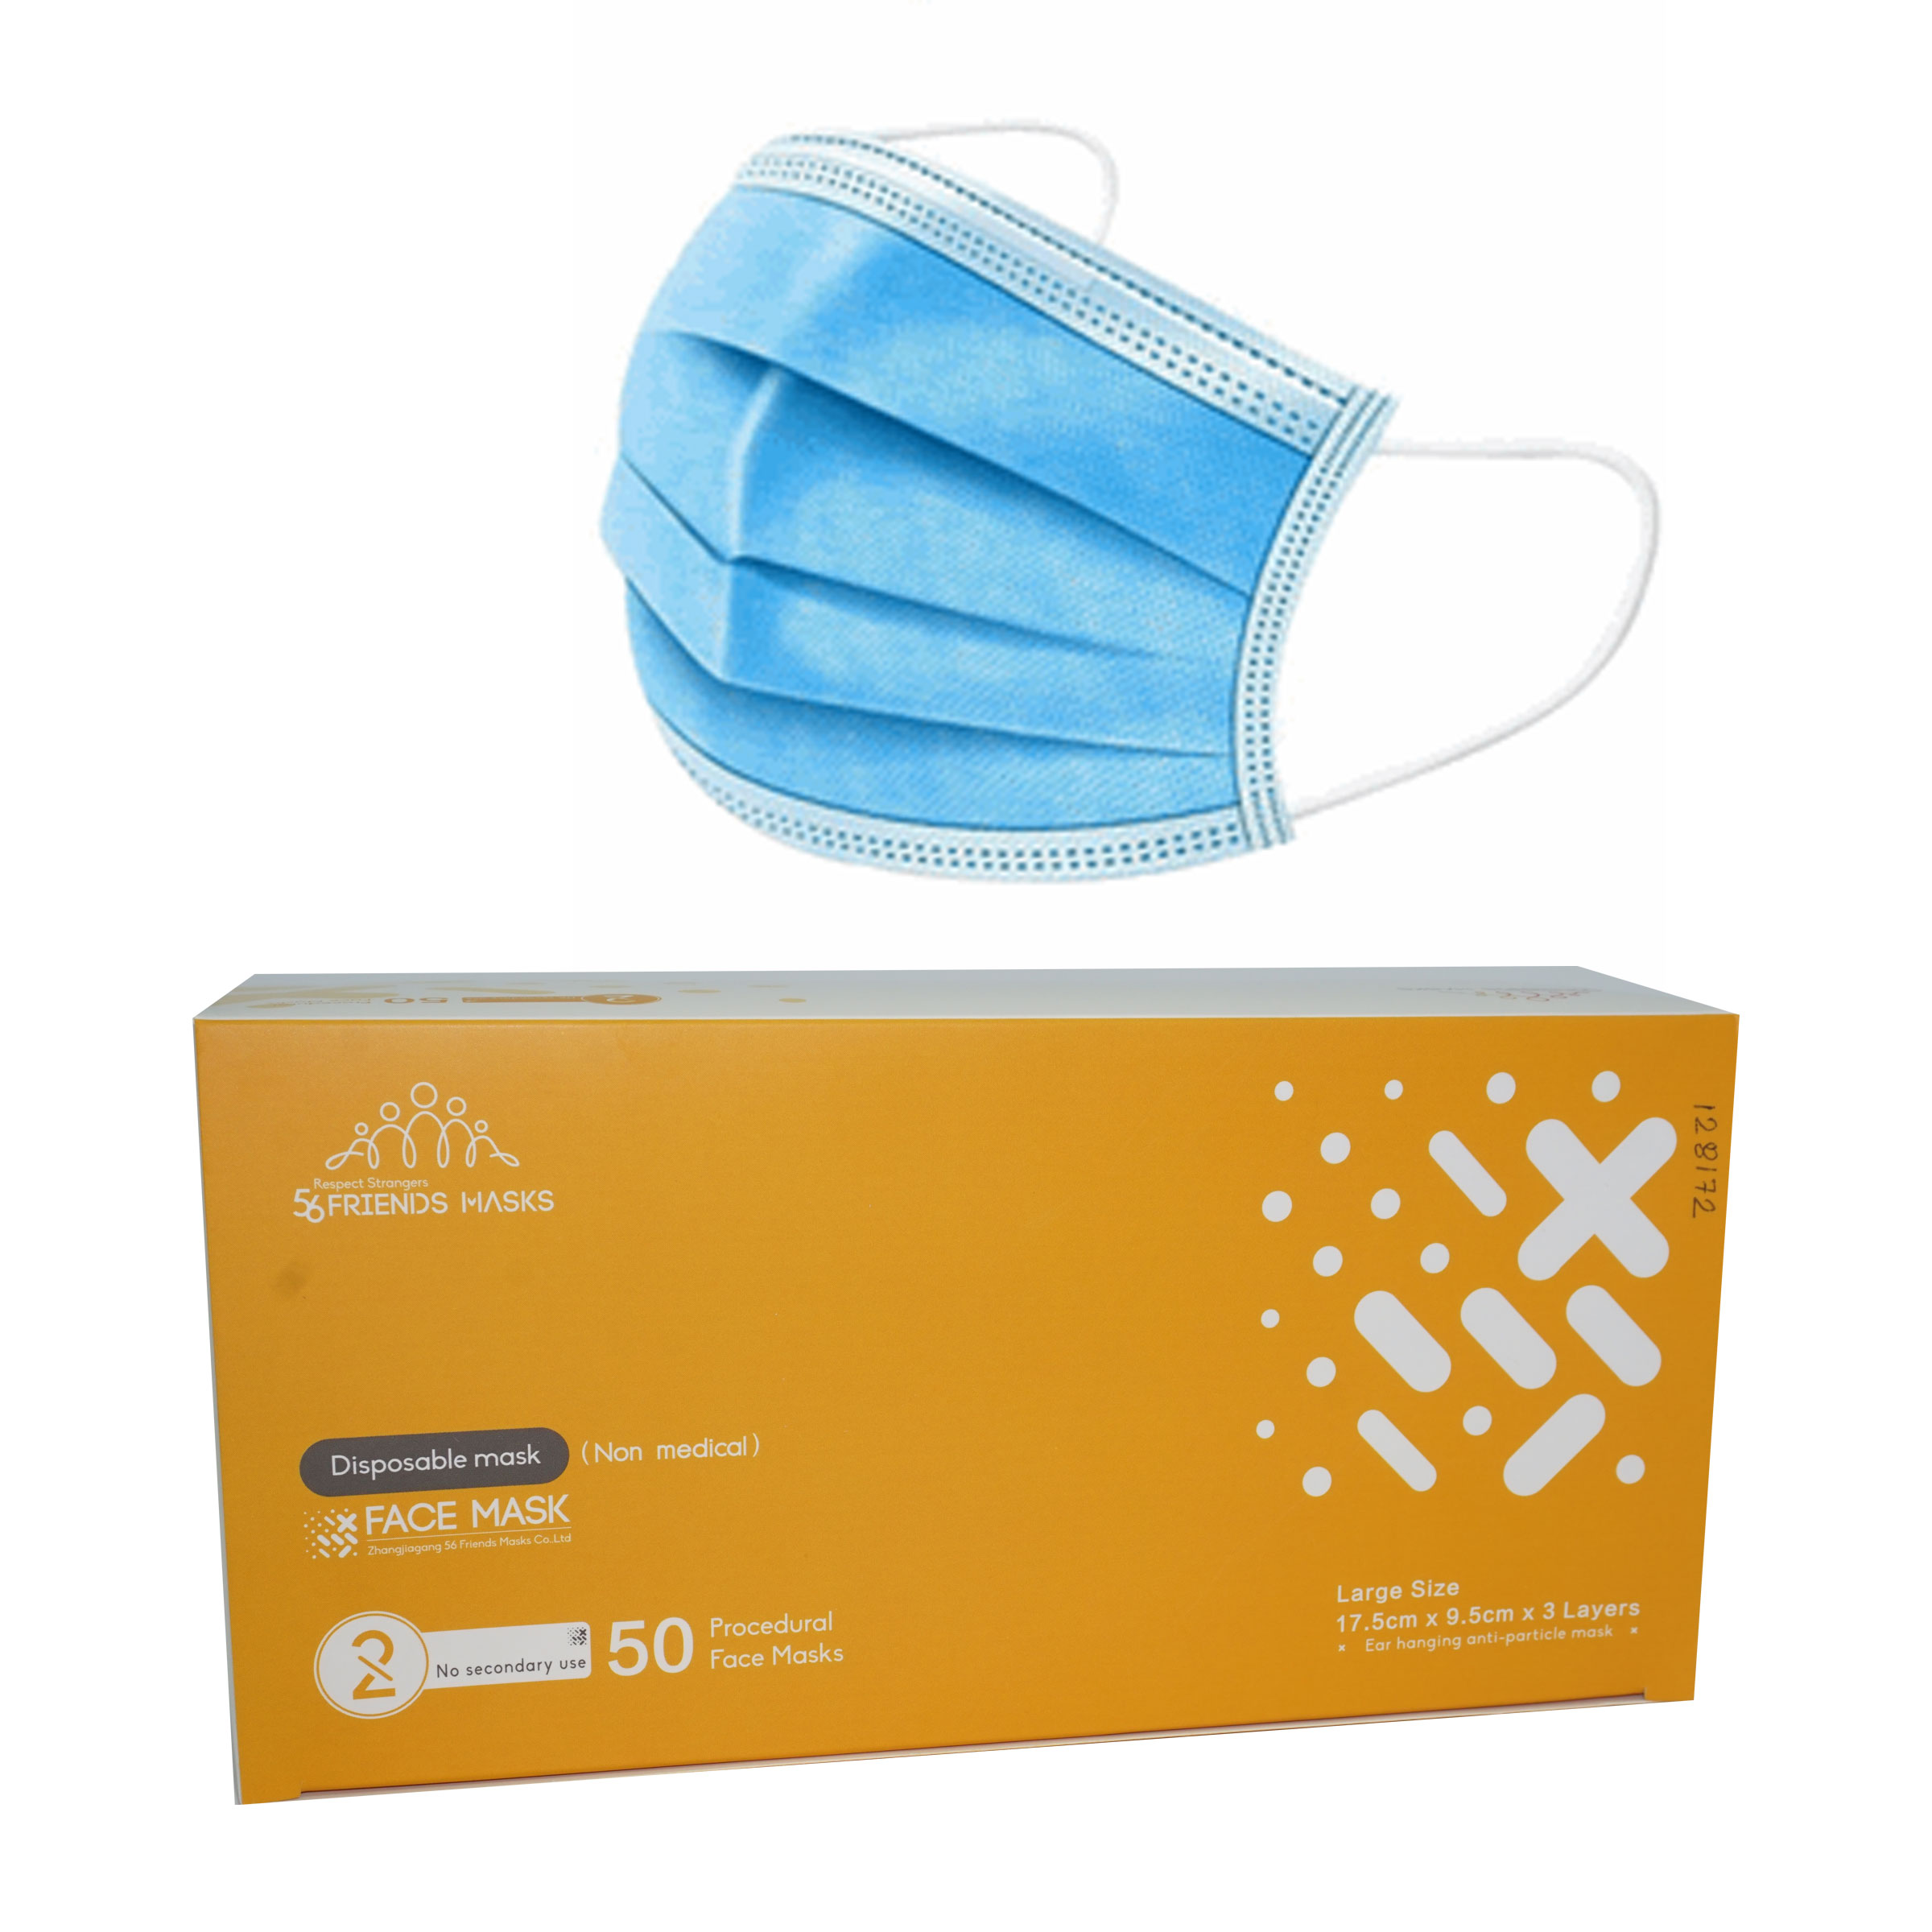 Face Mask - Surgical - Lrd Available at Online Family Pharmacy Qatar Doha